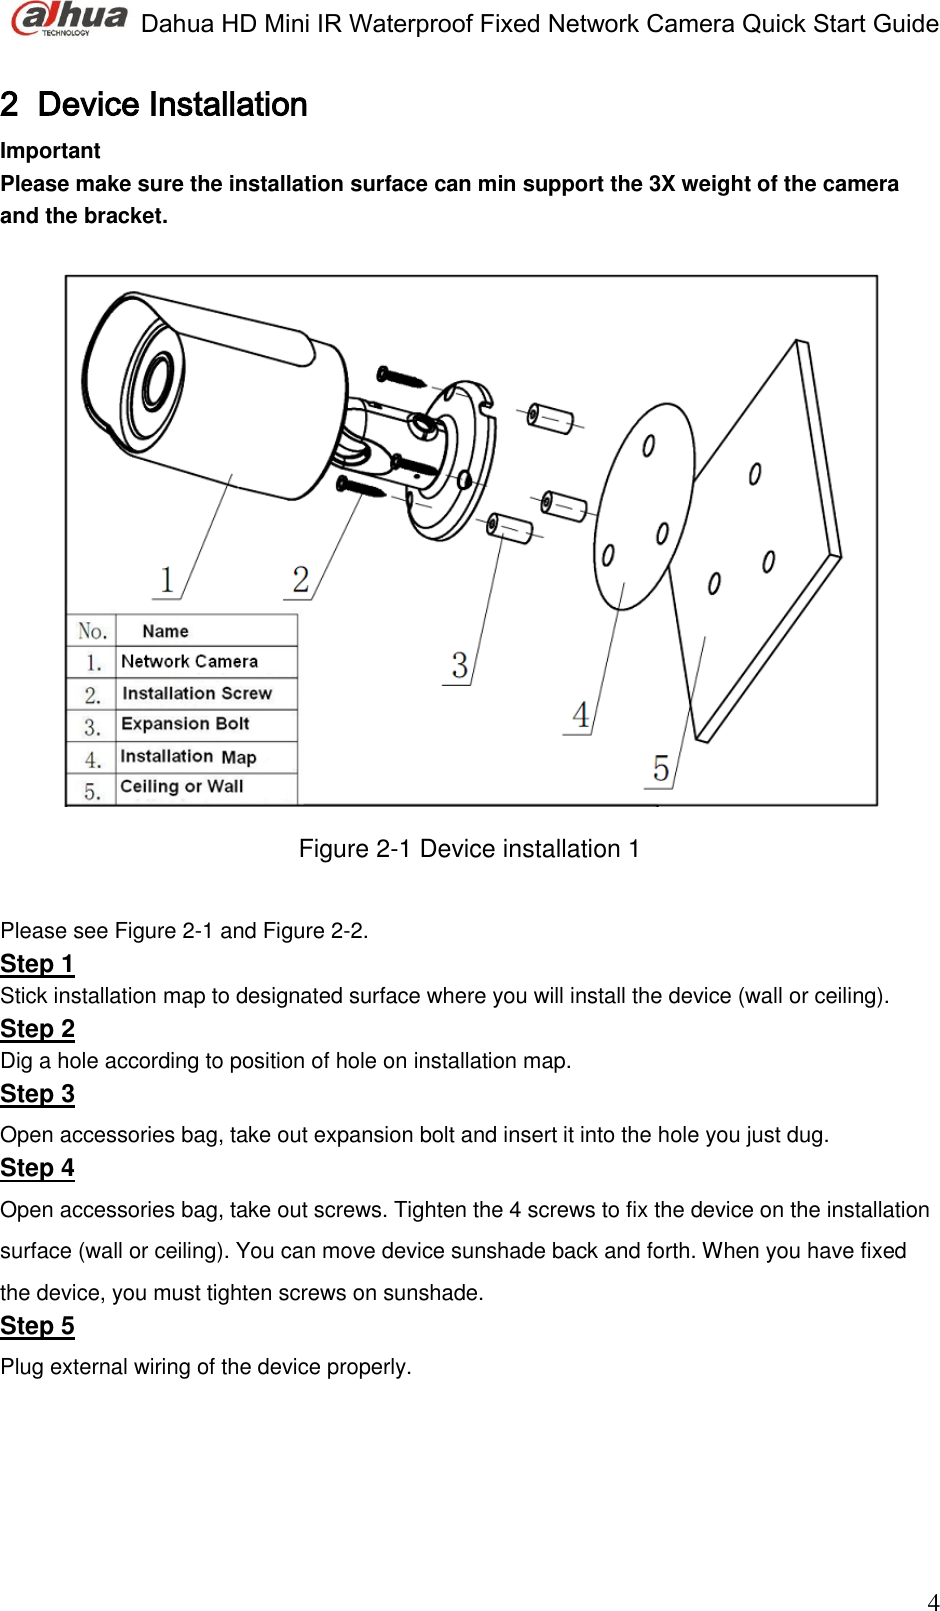  Dahua HD Mini IR Waterproof Fixed Network Camera Quick Start Guide                                                                               4 2 Device Installation  Important Please make sure the installation surface can min support the 3X weight of the camera and the bracket.    Figure 2-1 Device installation 1  Please see Figure 2-1 and Figure 2-2. Step 1 Stick installation map to designated surface where you will install the device (wall or ceiling). Step 2  Dig a hole according to position of hole on installation map. Step 3 Open accessories bag, take out expansion bolt and insert it into the hole you just dug.  Step 4 Open accessories bag, take out screws. Tighten the 4 screws to fix the device on the installation surface (wall or ceiling). You can move device sunshade back and forth. When you have fixed the device, you must tighten screws on sunshade.  Step 5 Plug external wiring of the device properly.  